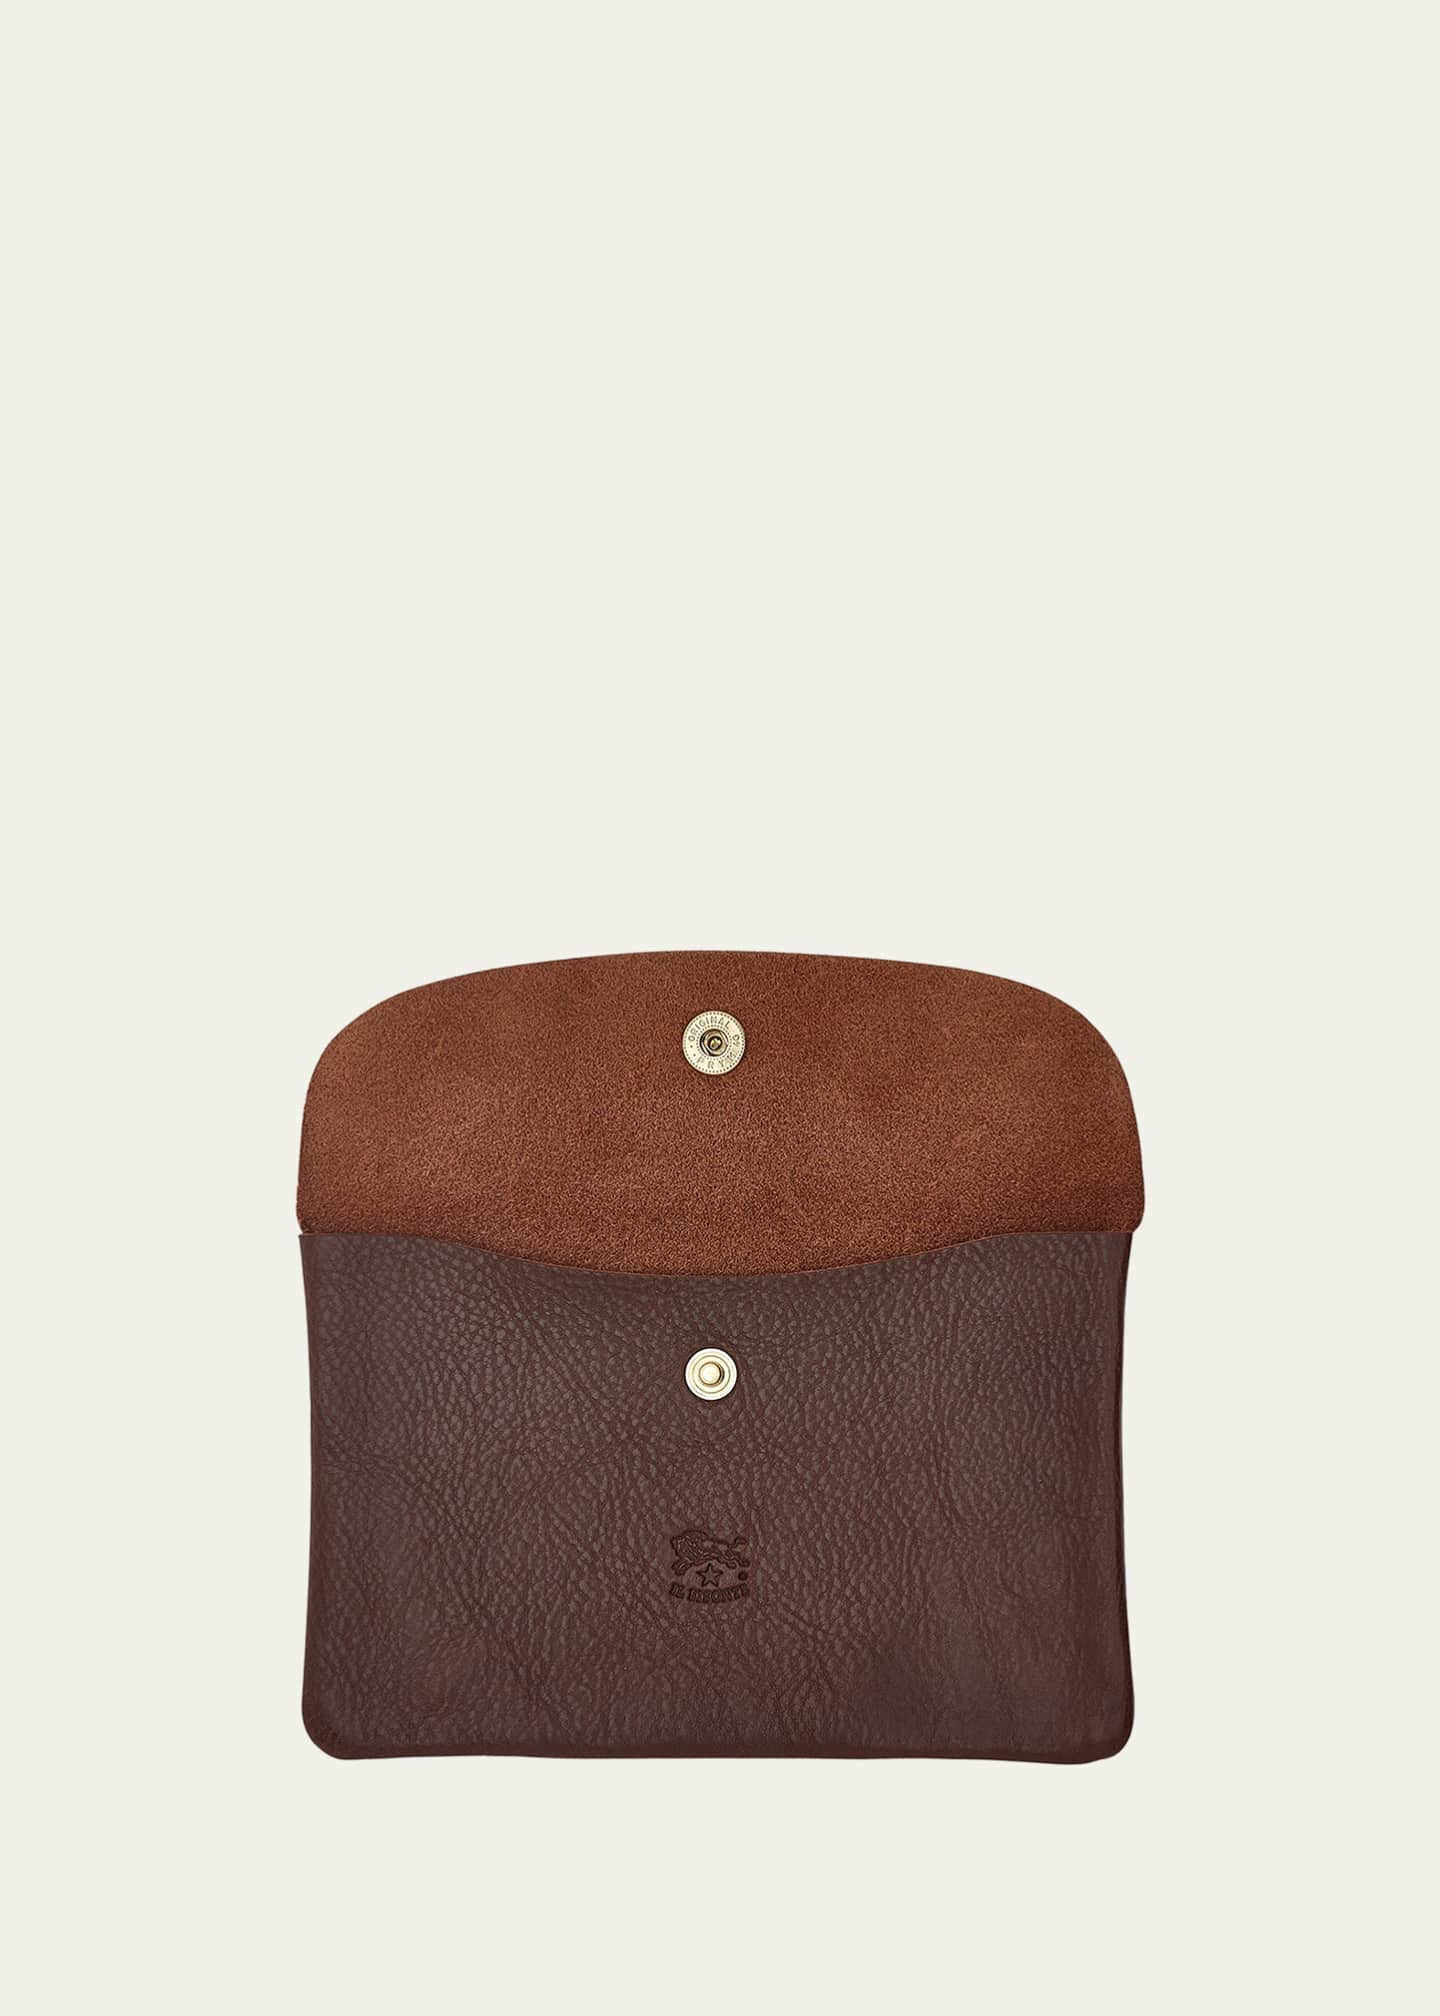 Il Bisonte Unisex Leather Snap Pouch - Bergdorf Goodman